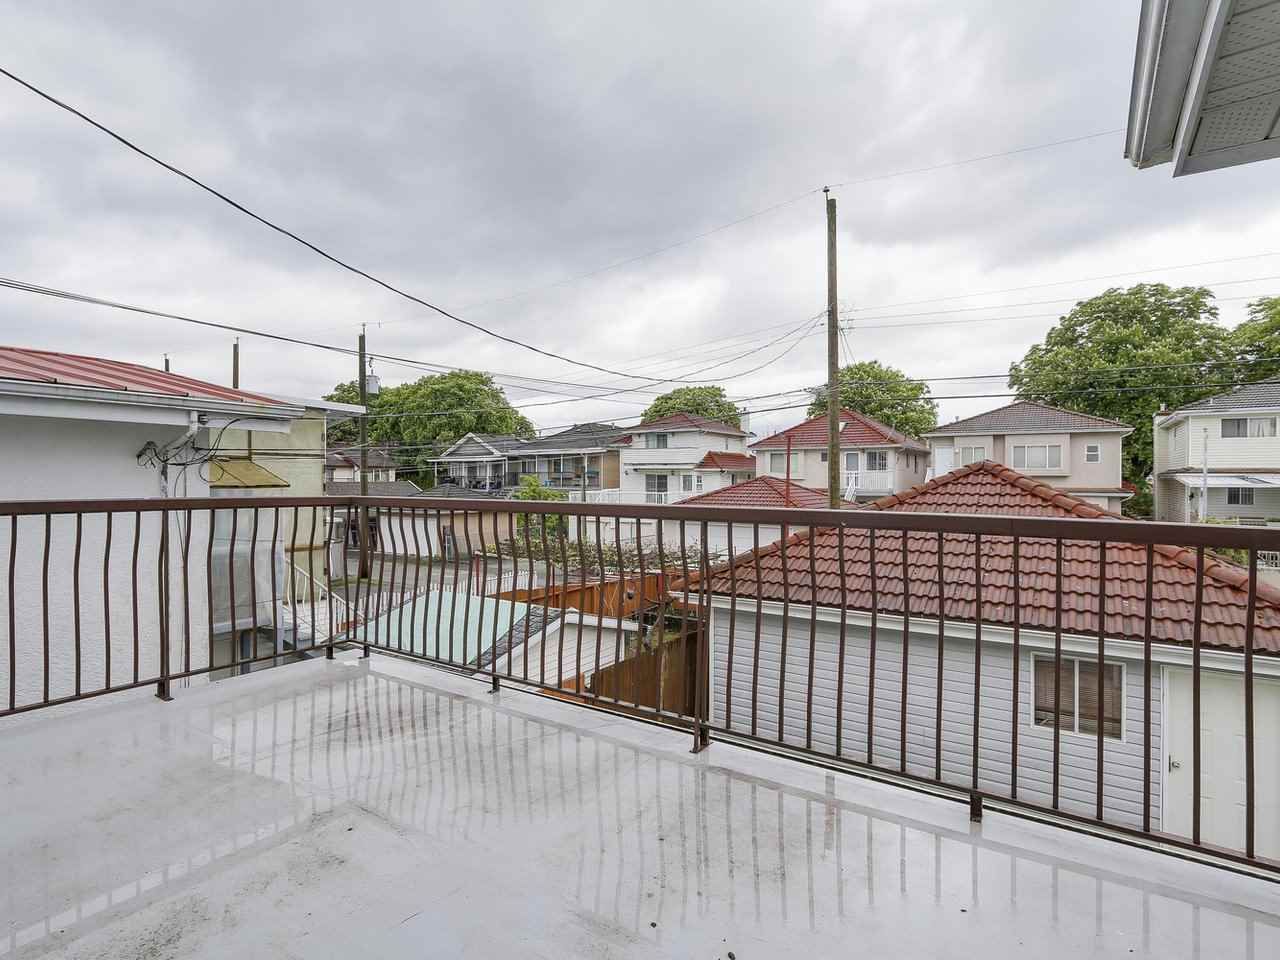 Photo 17: Photos: 2223 E 48TH AVENUE in Vancouver: Killarney VE House for sale (Vancouver East)  : MLS®# R2165891